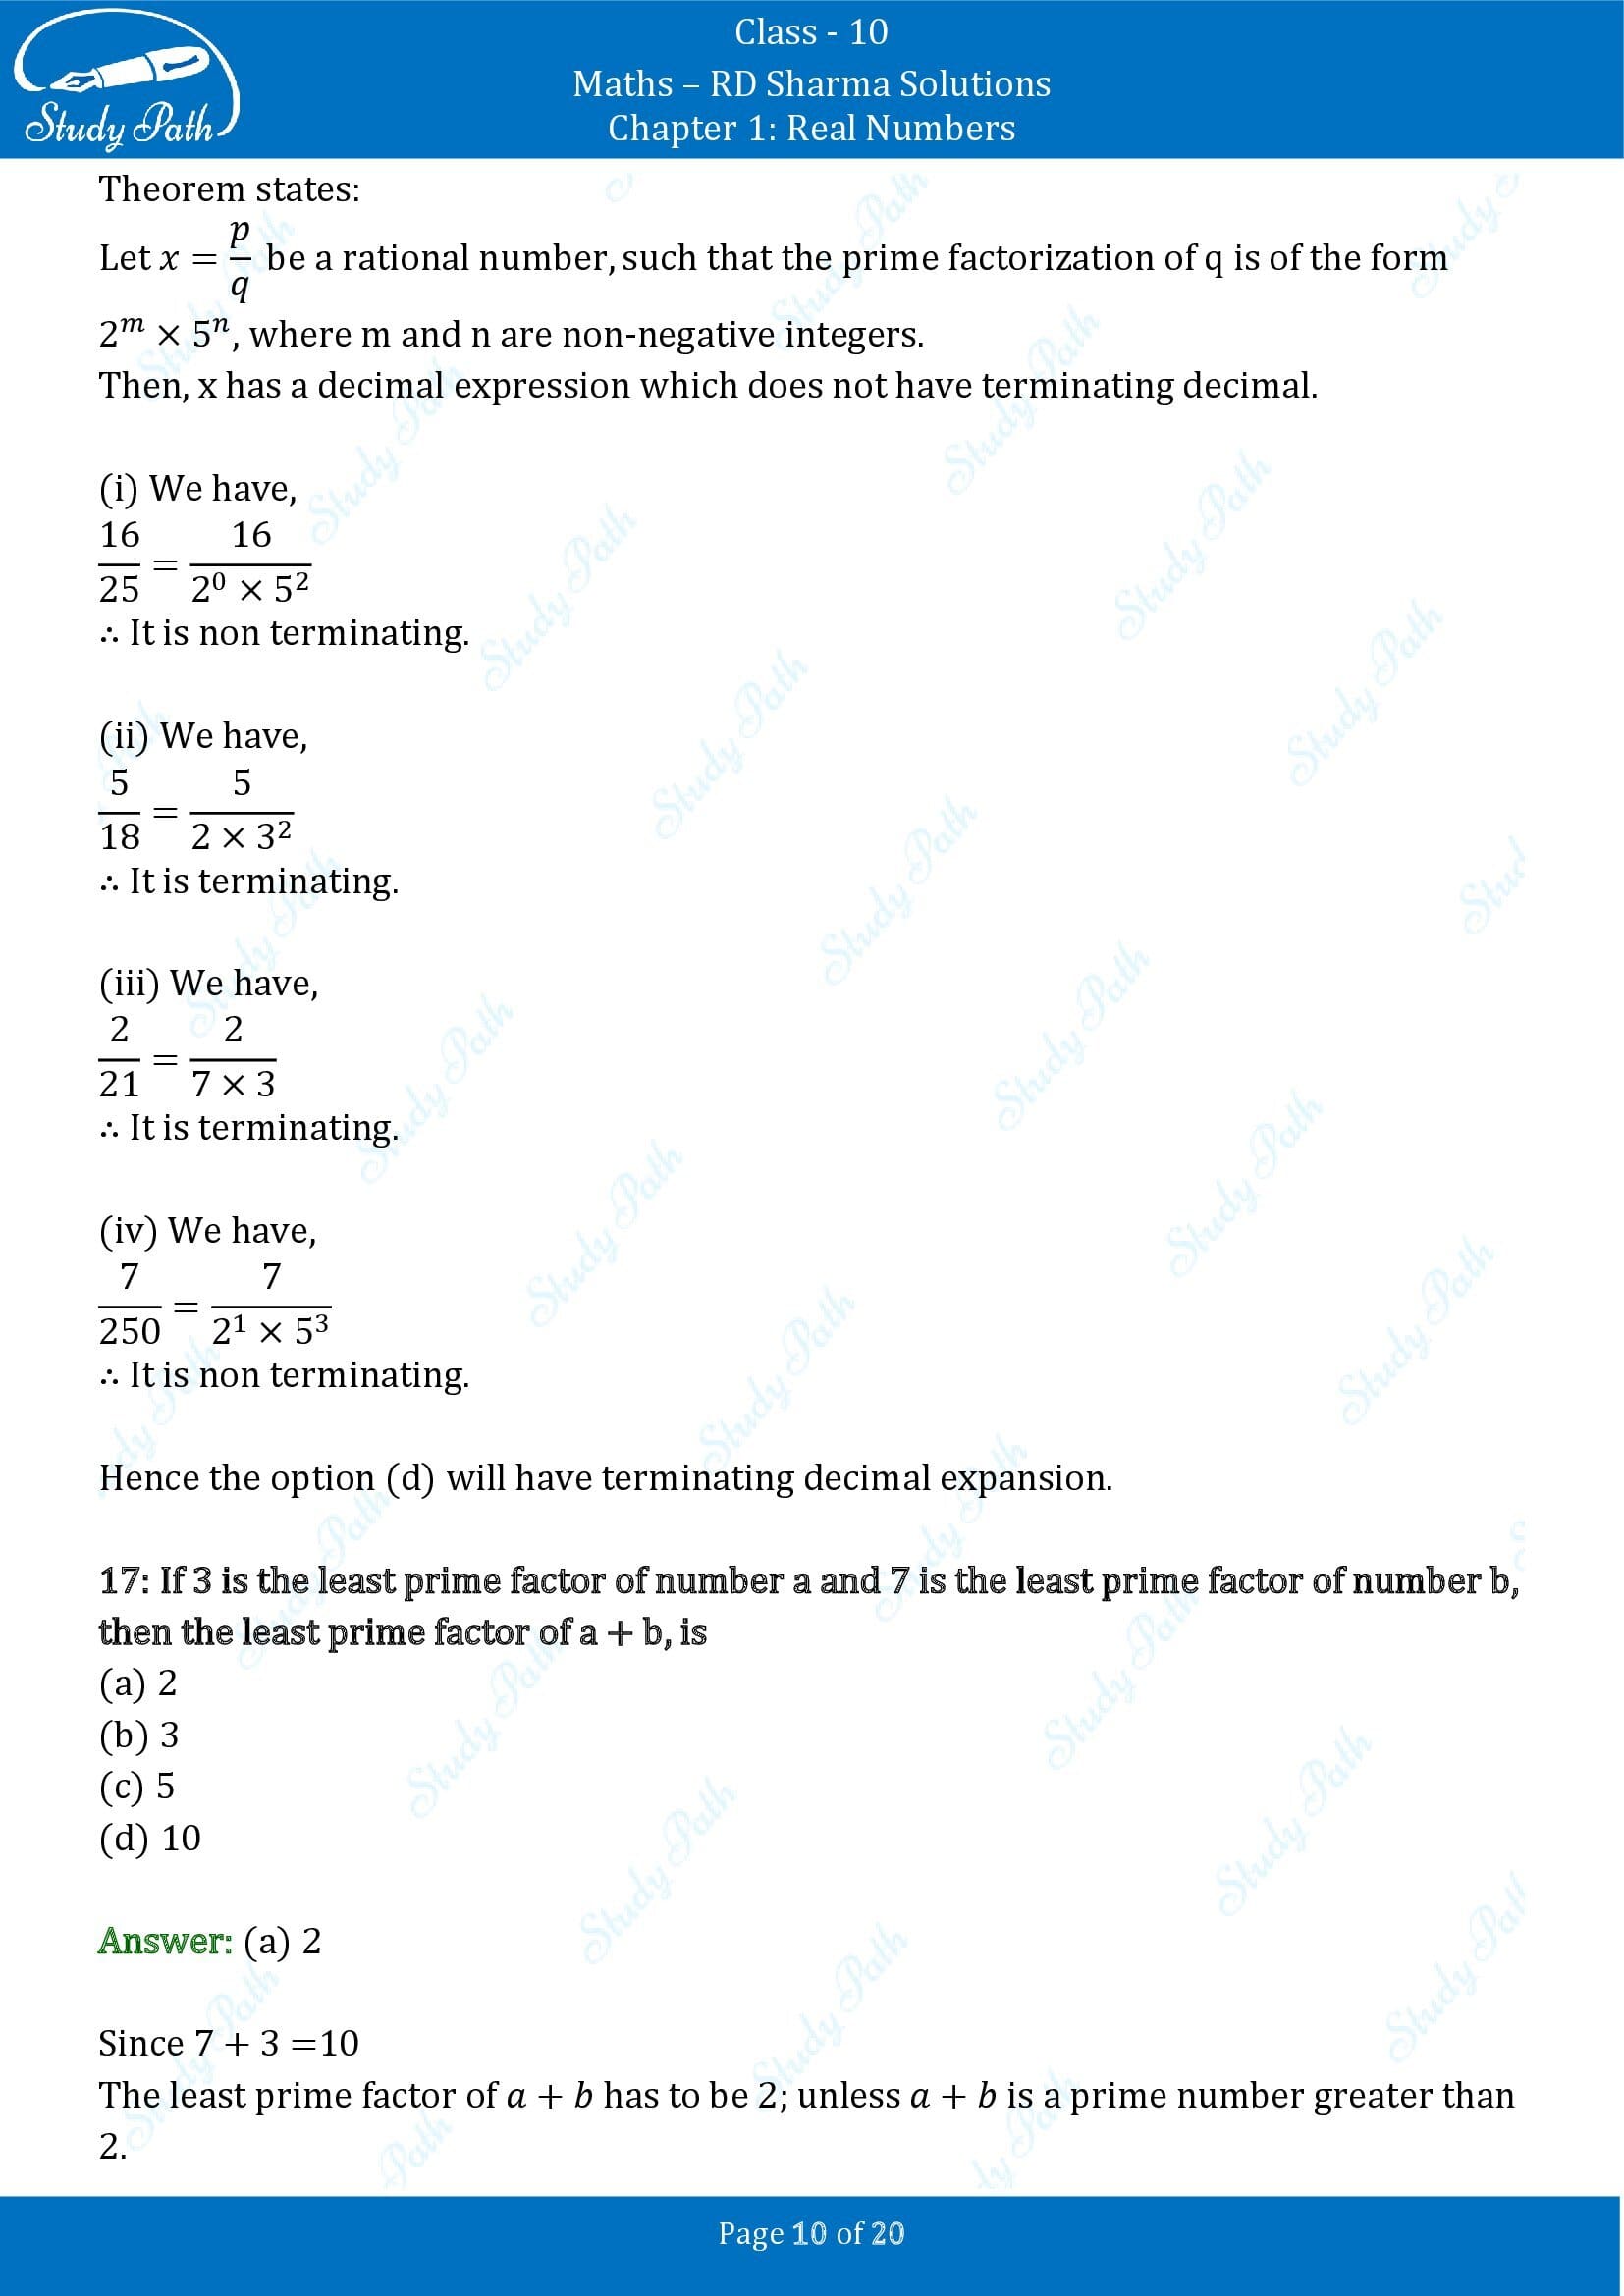 RD Sharma Solutions Class 10 Chapter 1 Real Numbers Multiple Choice Questions MCQs 00010